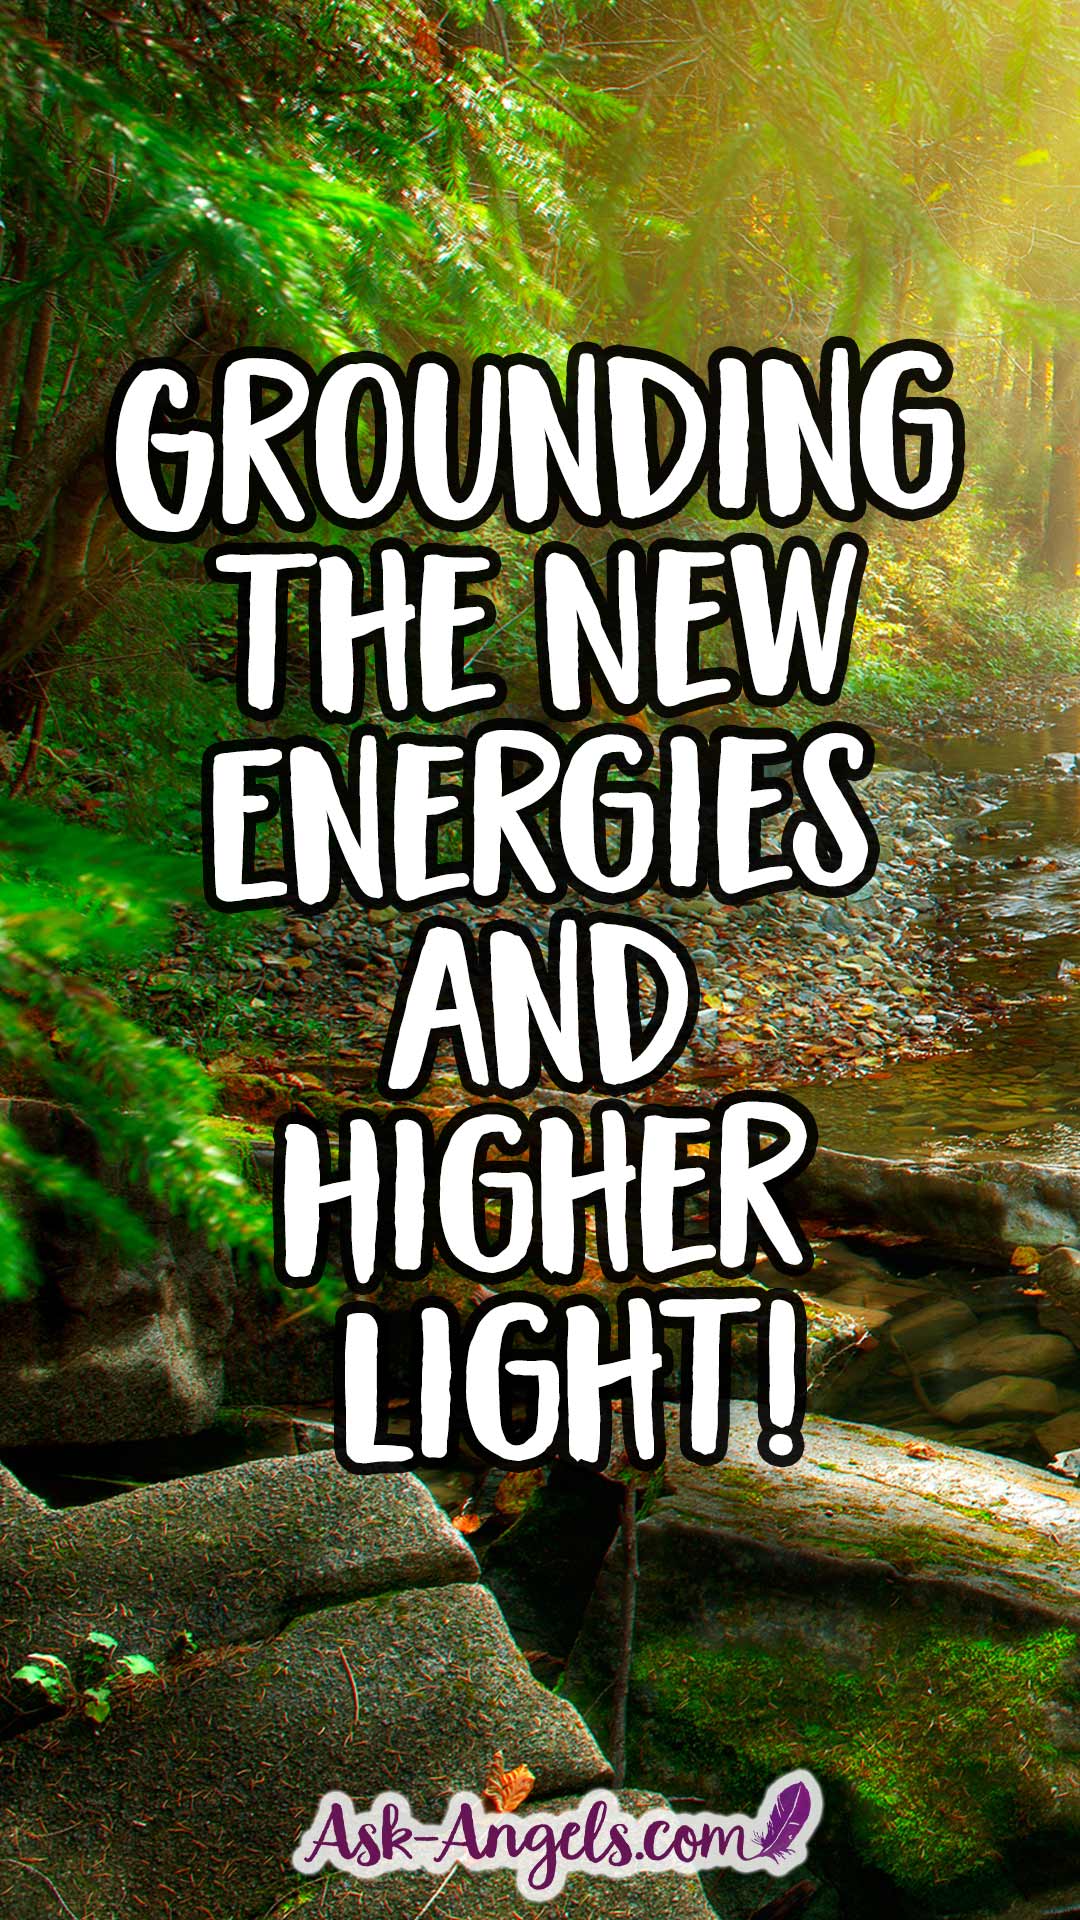 Learn a powerful grounding exercise for grounding the new energies and higher light!